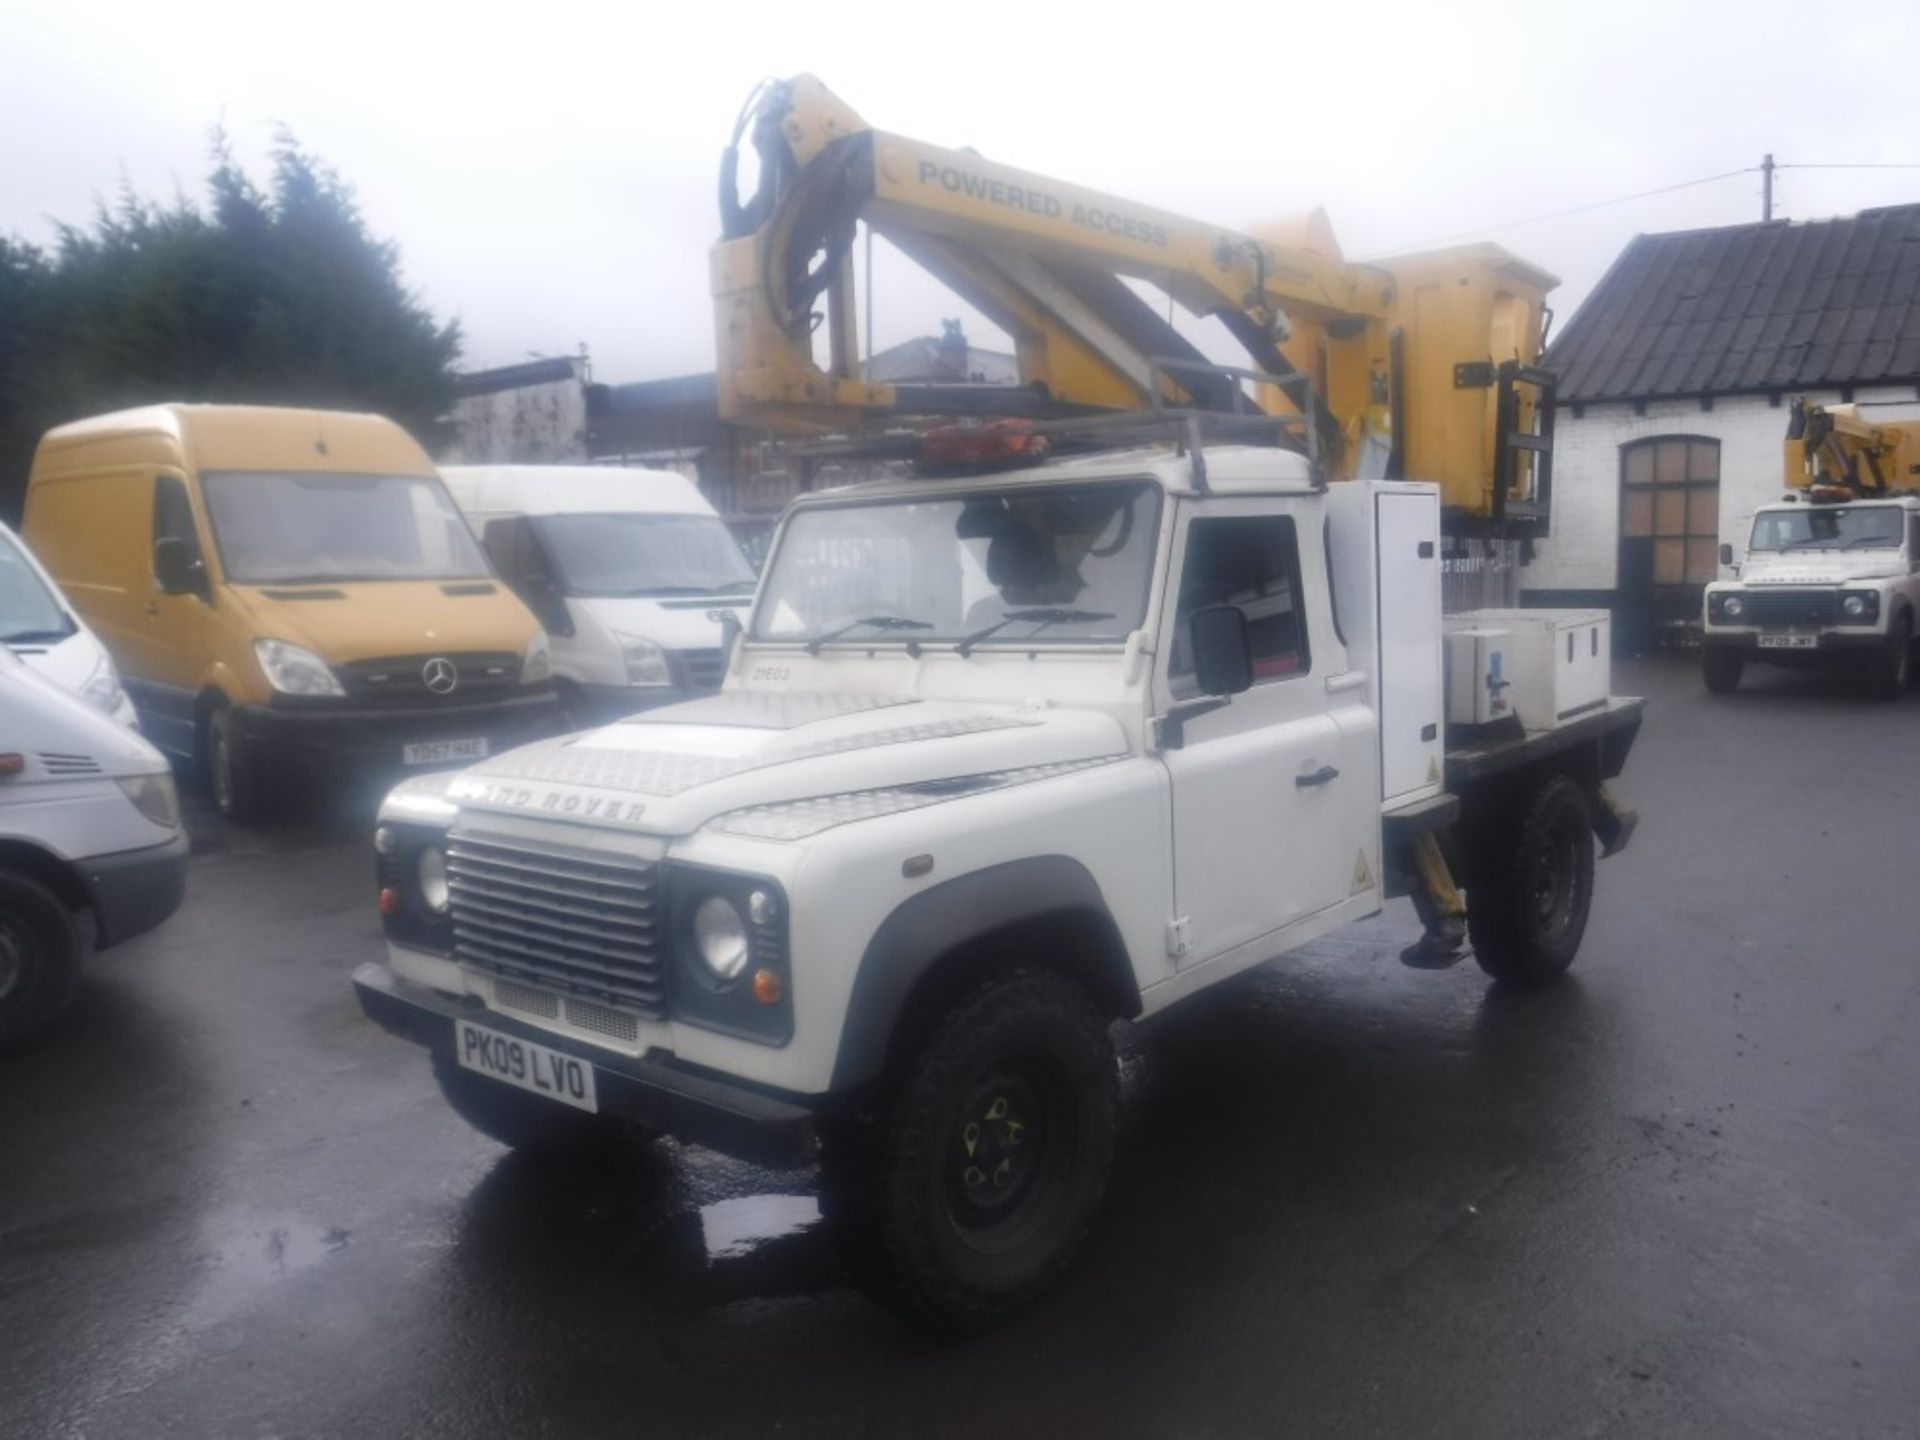 09 reg LAND ROVER DEFENDER 130 S/C C/W POWERED ACCESS LIFT (DIRECT ELECTRICITY NW) 1ST REG 06/09, - Image 2 of 5